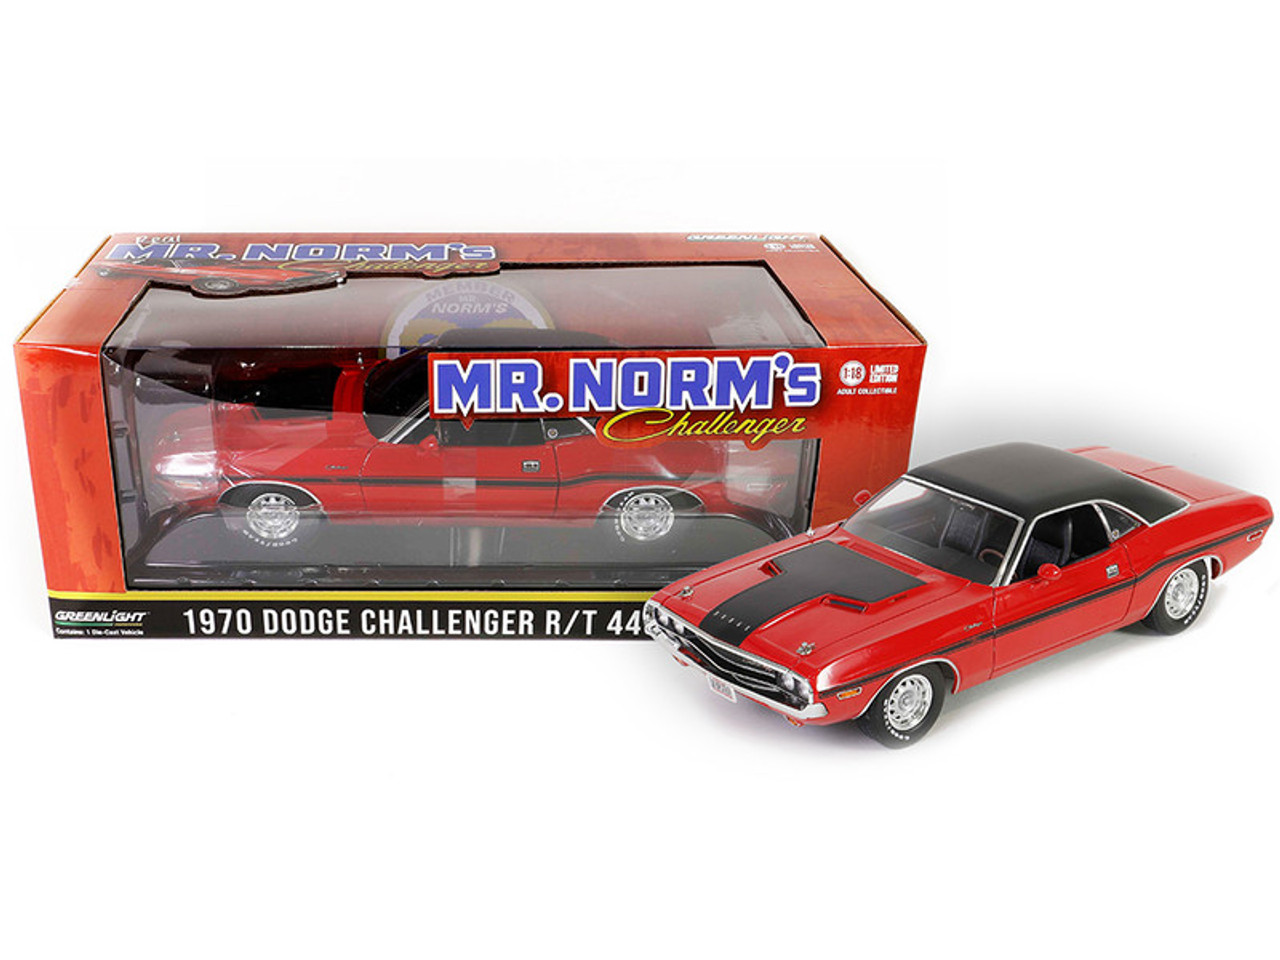 1970 Dodge Challenger R/T 440 Six-Pack - Mr. Norm's Grand Spaulding Dodge - Red with Black Interior - 1:18 Diecast Model by Greenlight